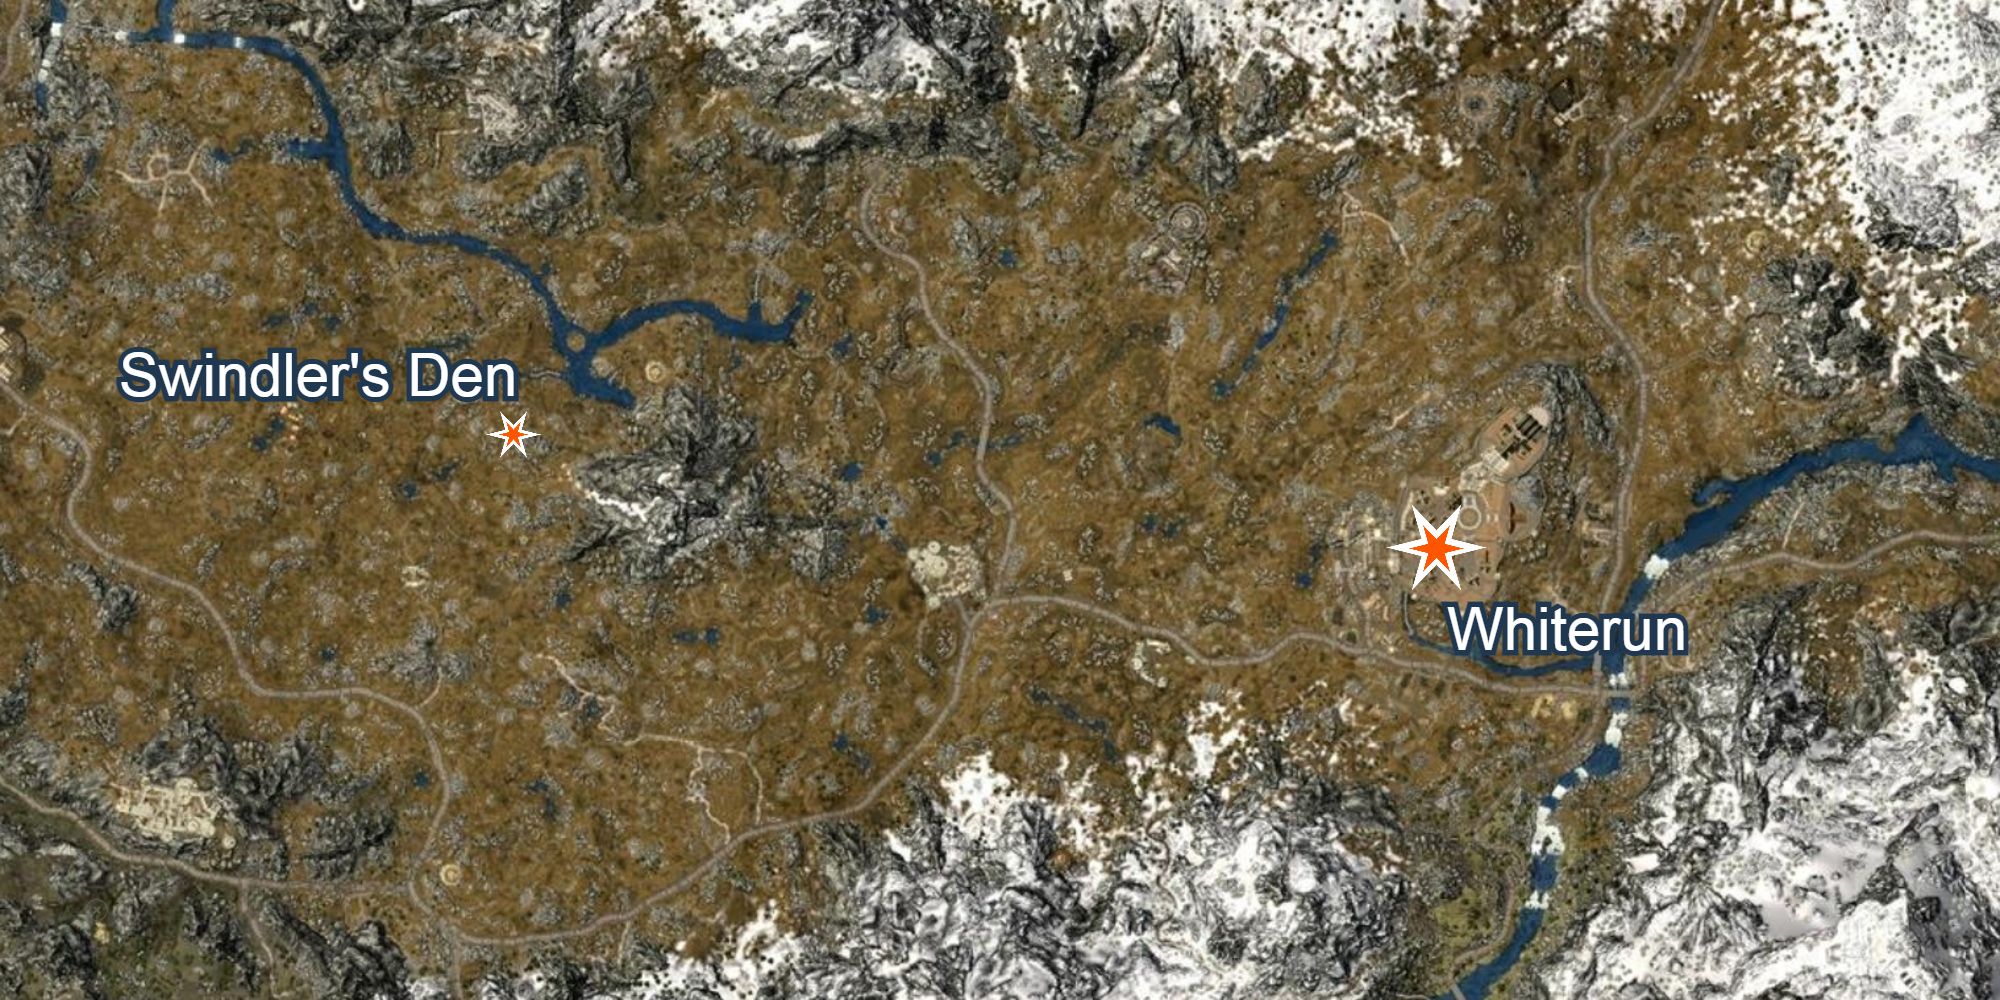 map showing the locations of whiterun and swindlers den